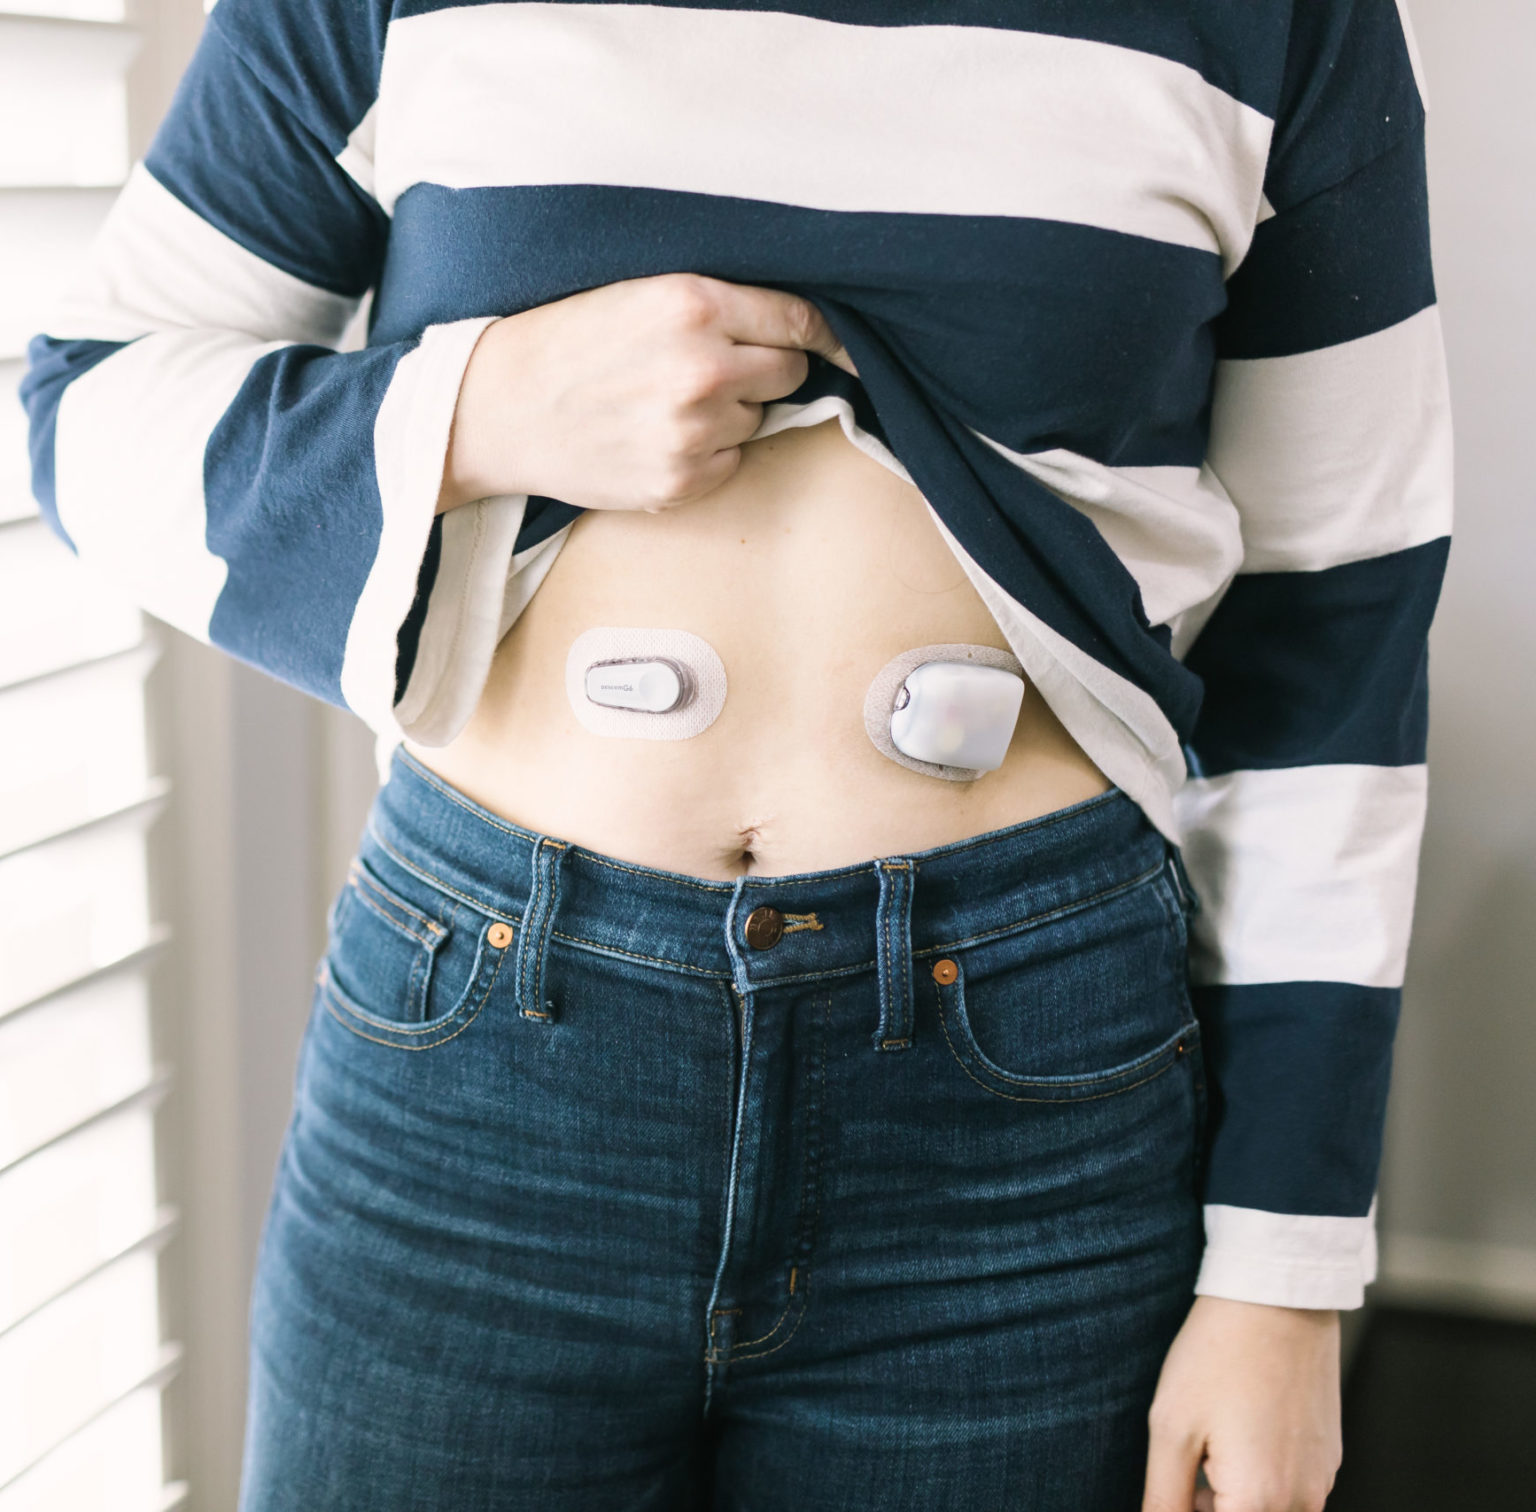 Top Continuous Glucose Monitoring Devices Milk & Honey Nutrition